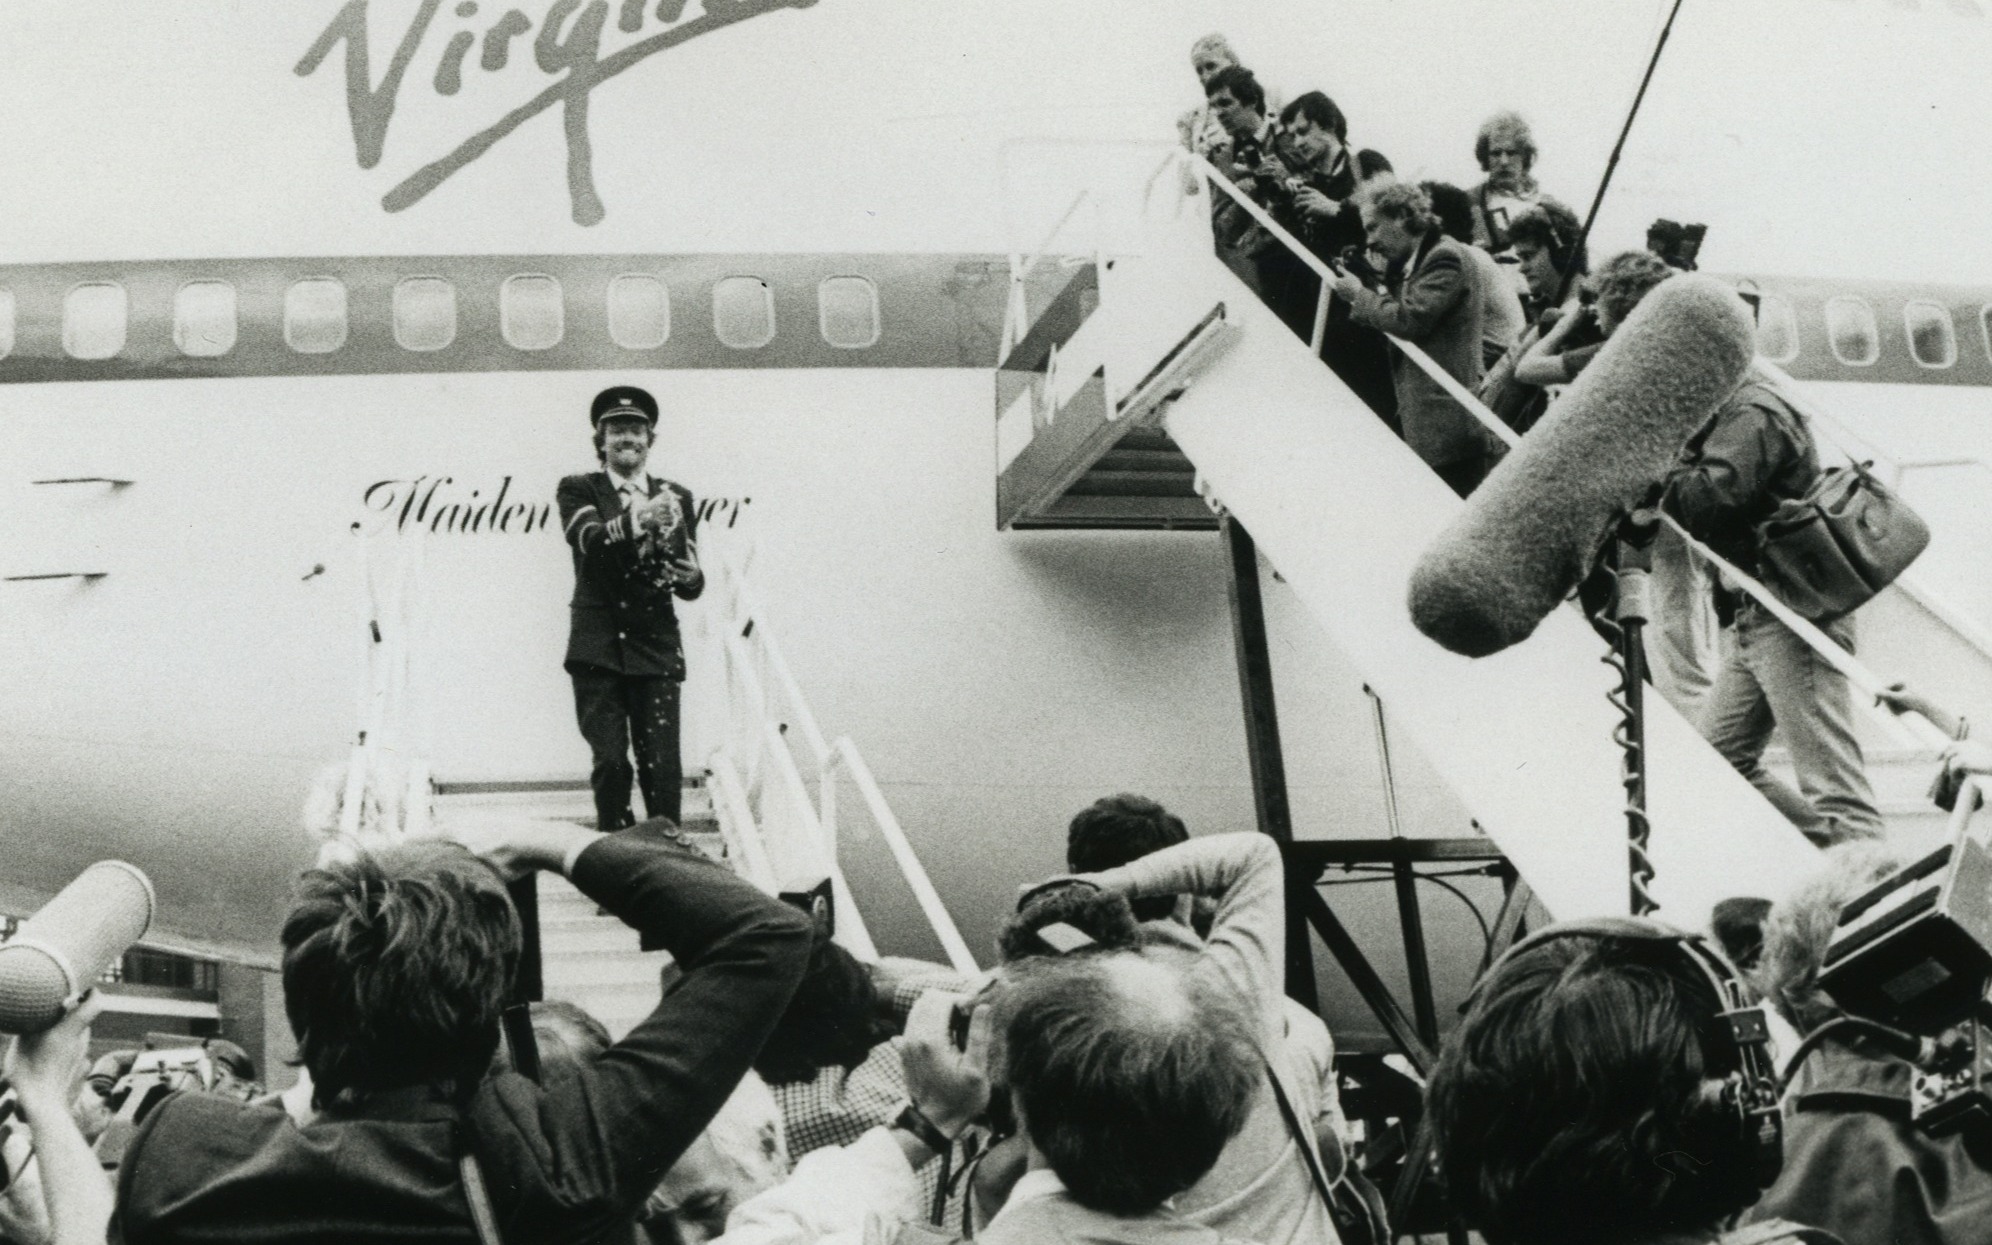 Richard Branson celebrating surrounded by the media in front of a Virgin Atlantic aeroplane